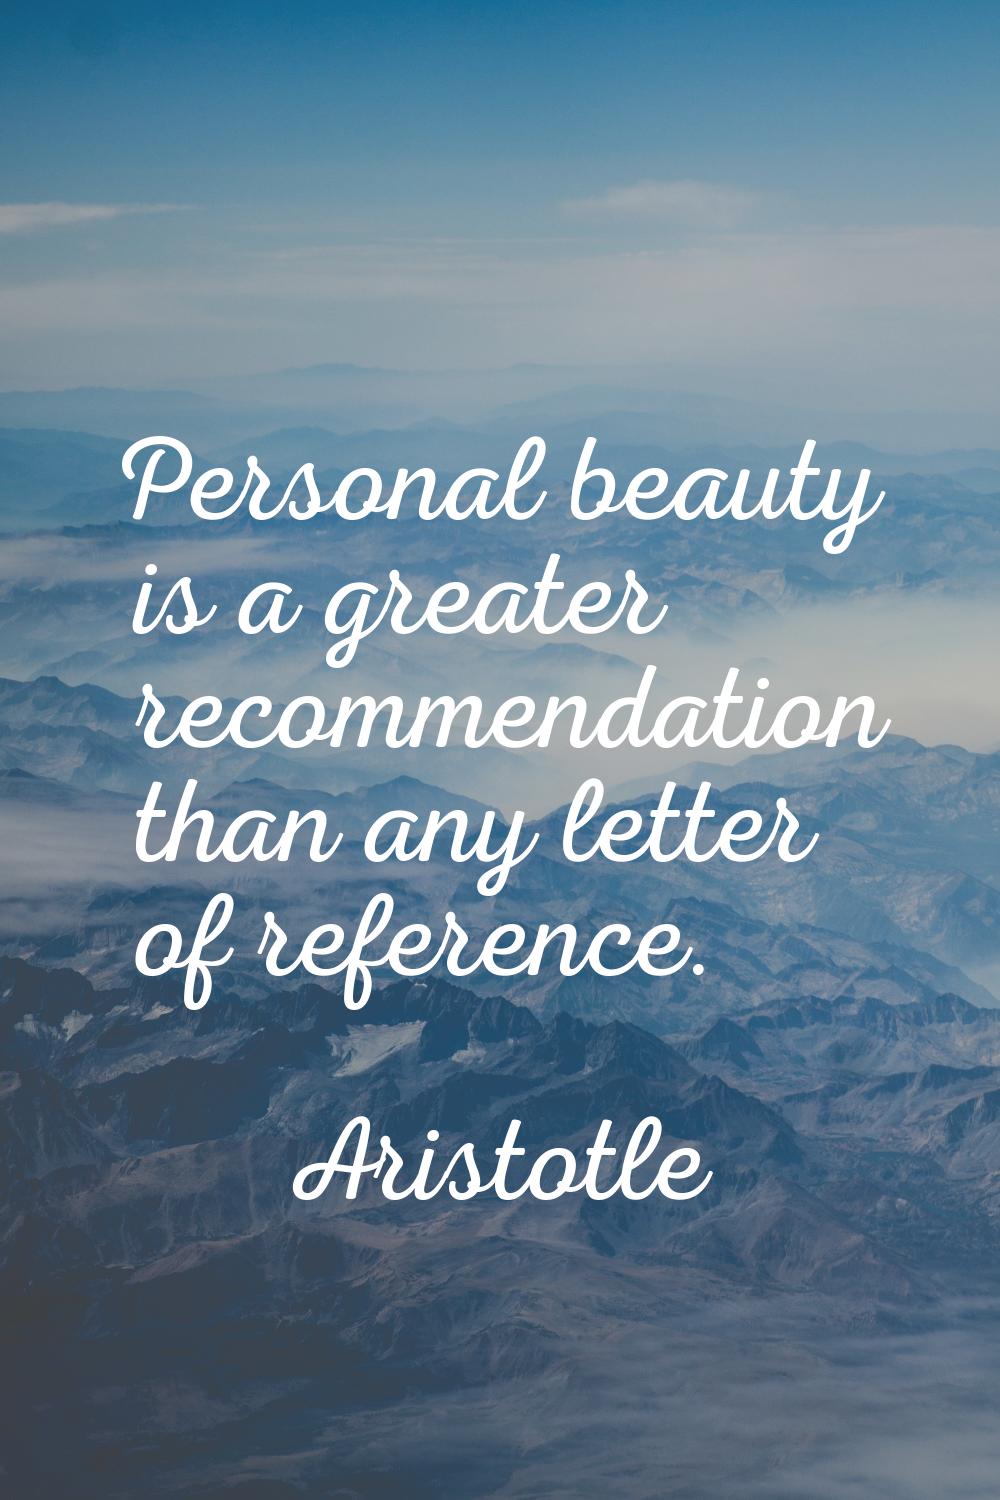 Personal beauty is a greater recommendation than any letter of reference.